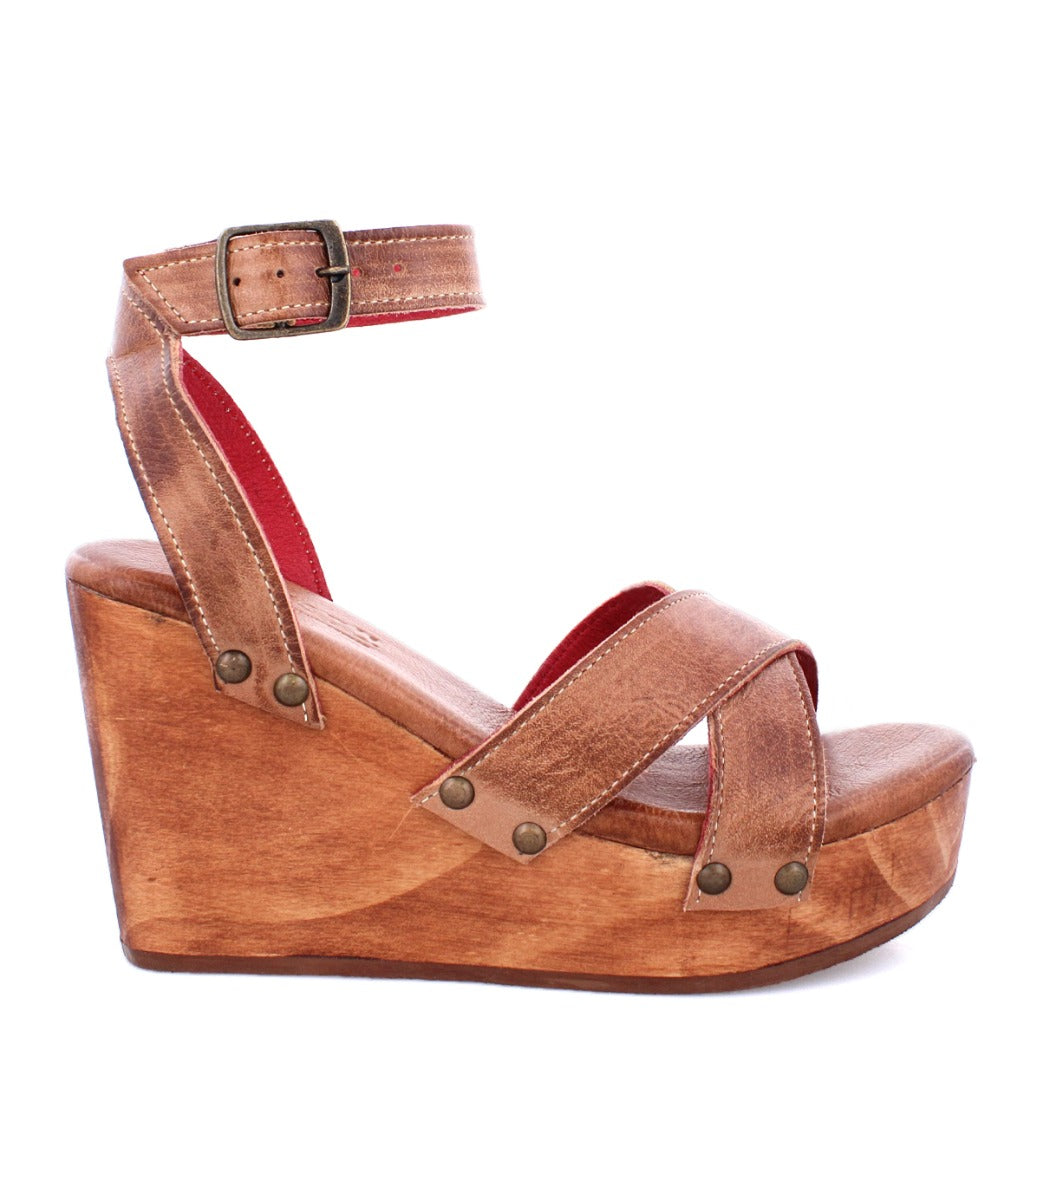 A women's Grettell wooden wedge sandal with straps and a wooden heel by Bed Stu.